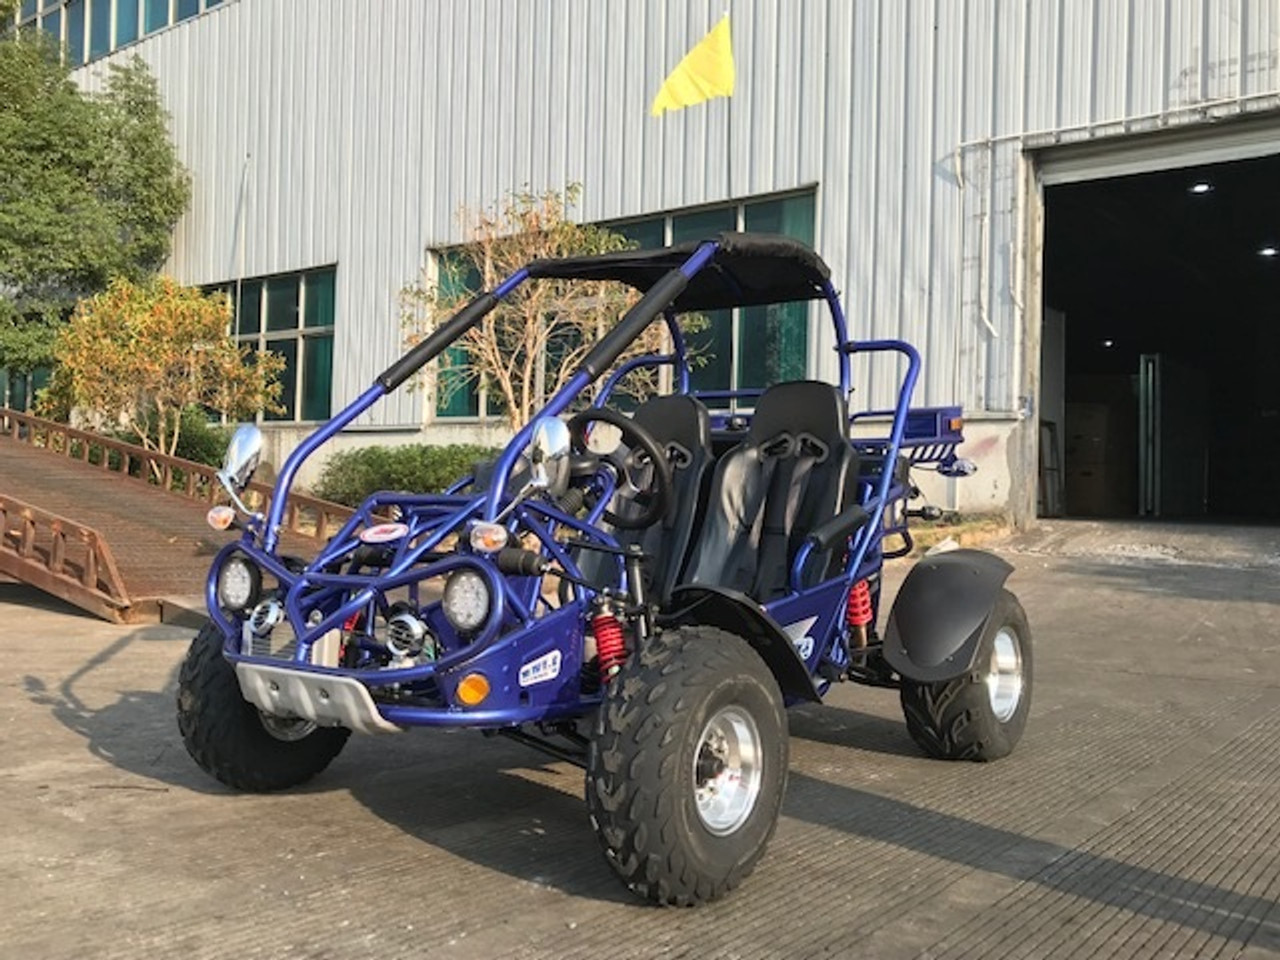 Trail master 300XRX-E EFI Go Kart, Fully Automatic With Reverse Engine, Liquid Cool Efi (Fuel Injection) - LEFT SIDE VIEW